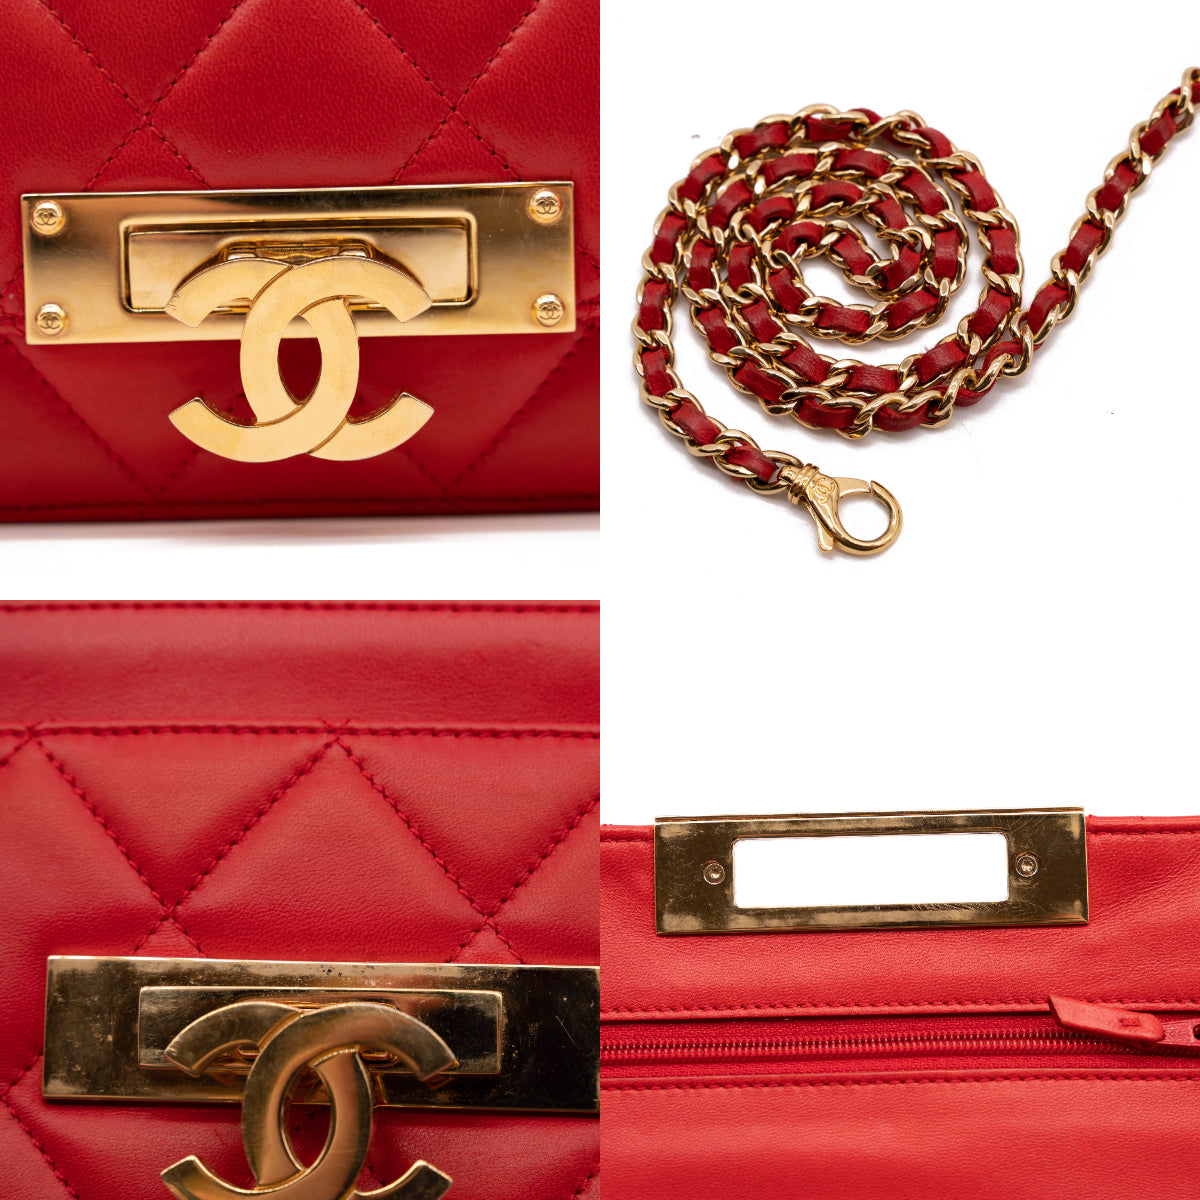 Chanel Gold Quilted Lambskin Double Zip Pearl Chain Wallet